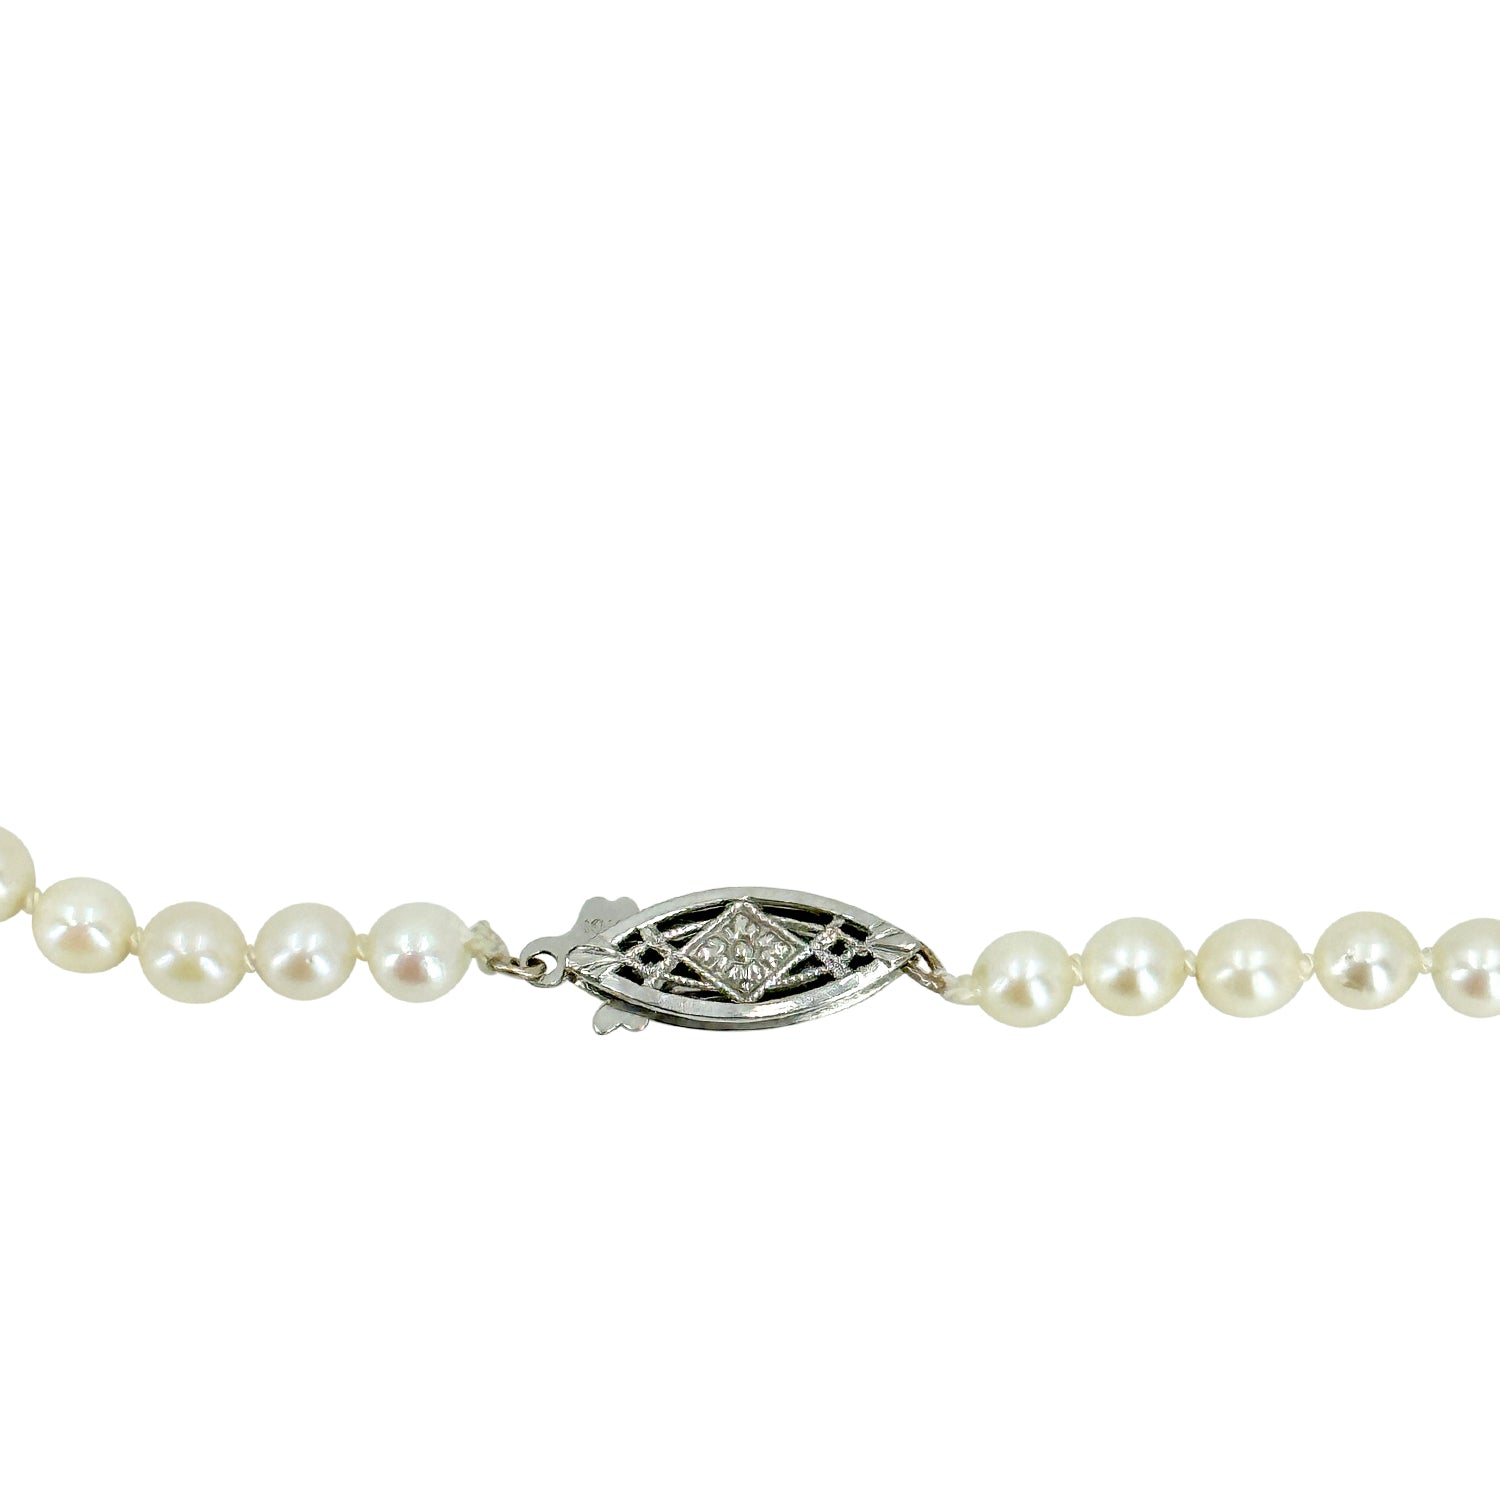 Mid-Century Floral Japanese Saltwater Akoya Cultured Pearl Necklace - 10K White Gold 17 Inch